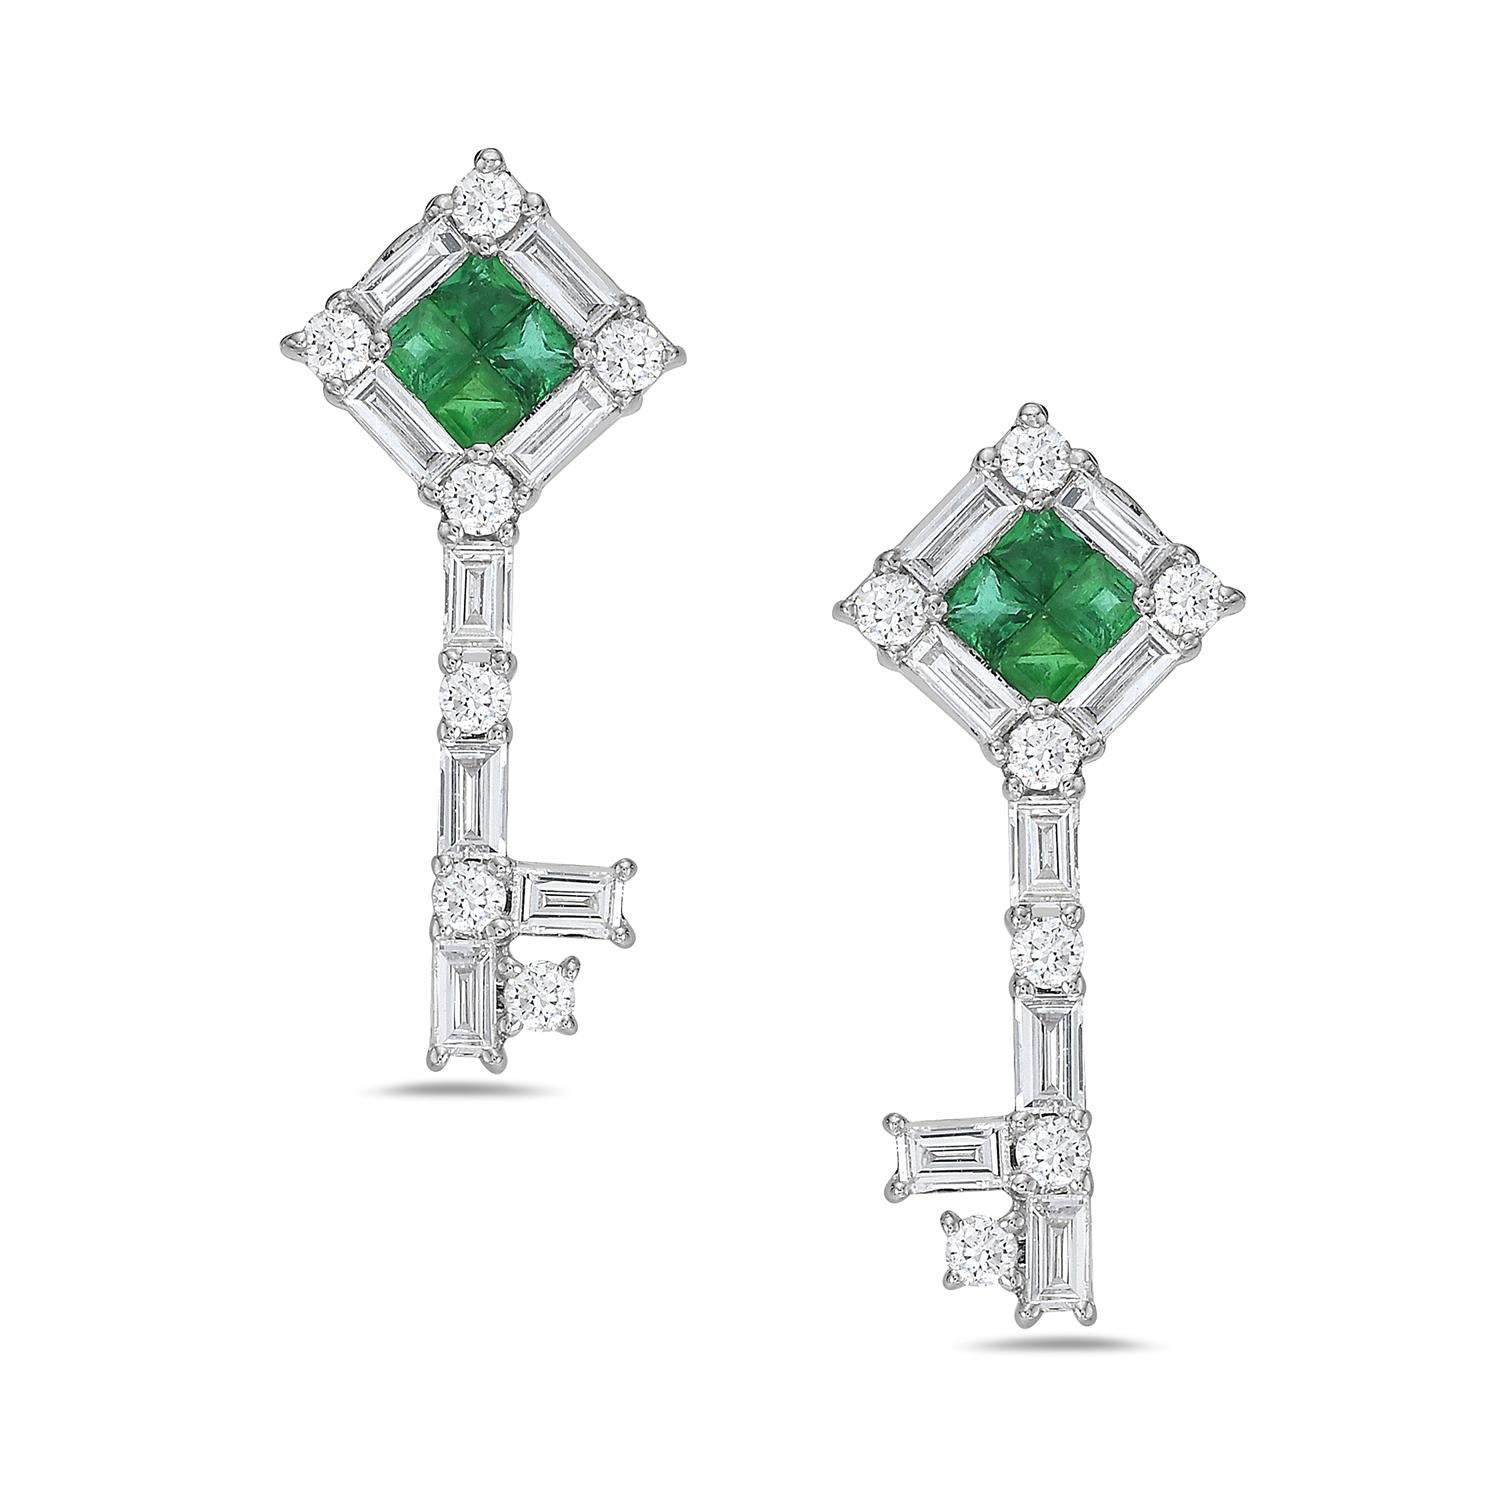 Mixed Cut Emerald & Diamond Key Shaped Earrings Made In 18k White Gold For Sale